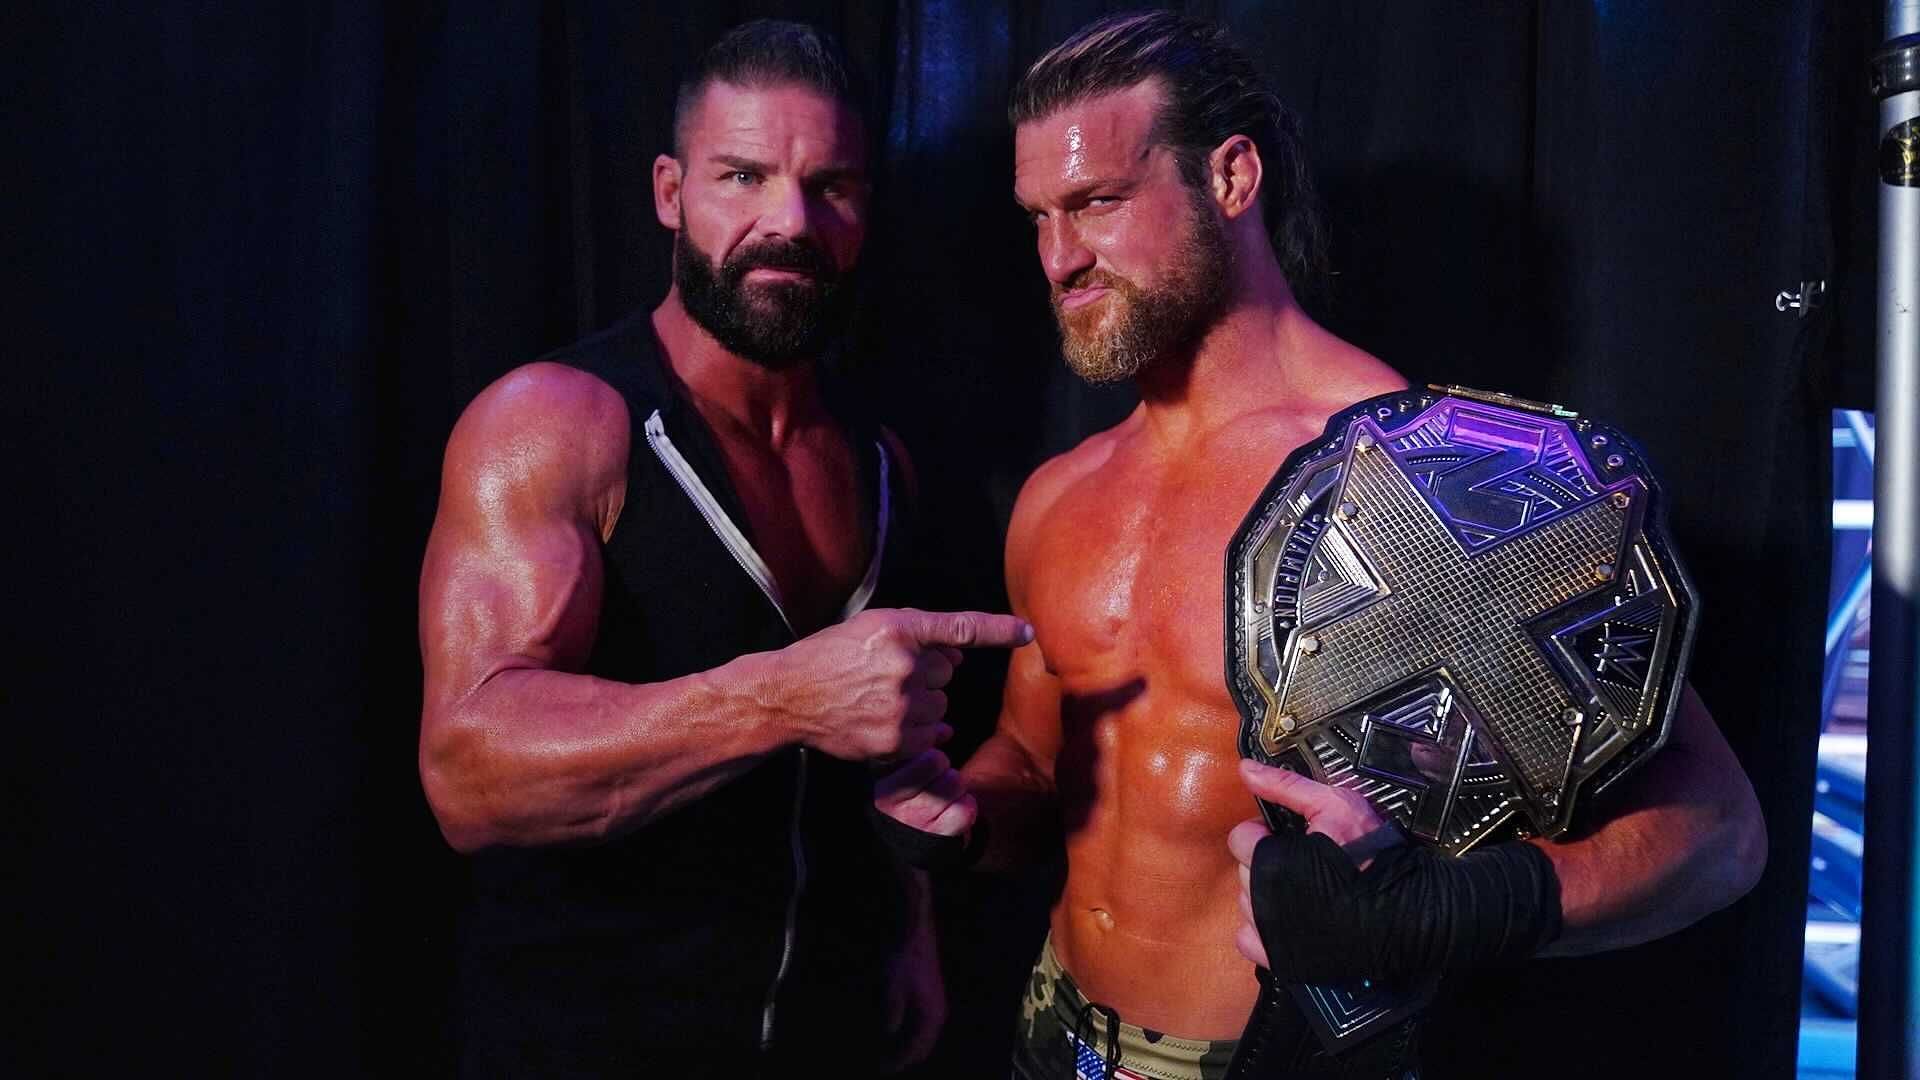 The Showoff shocked the world earlier this year by winning the NXT title.